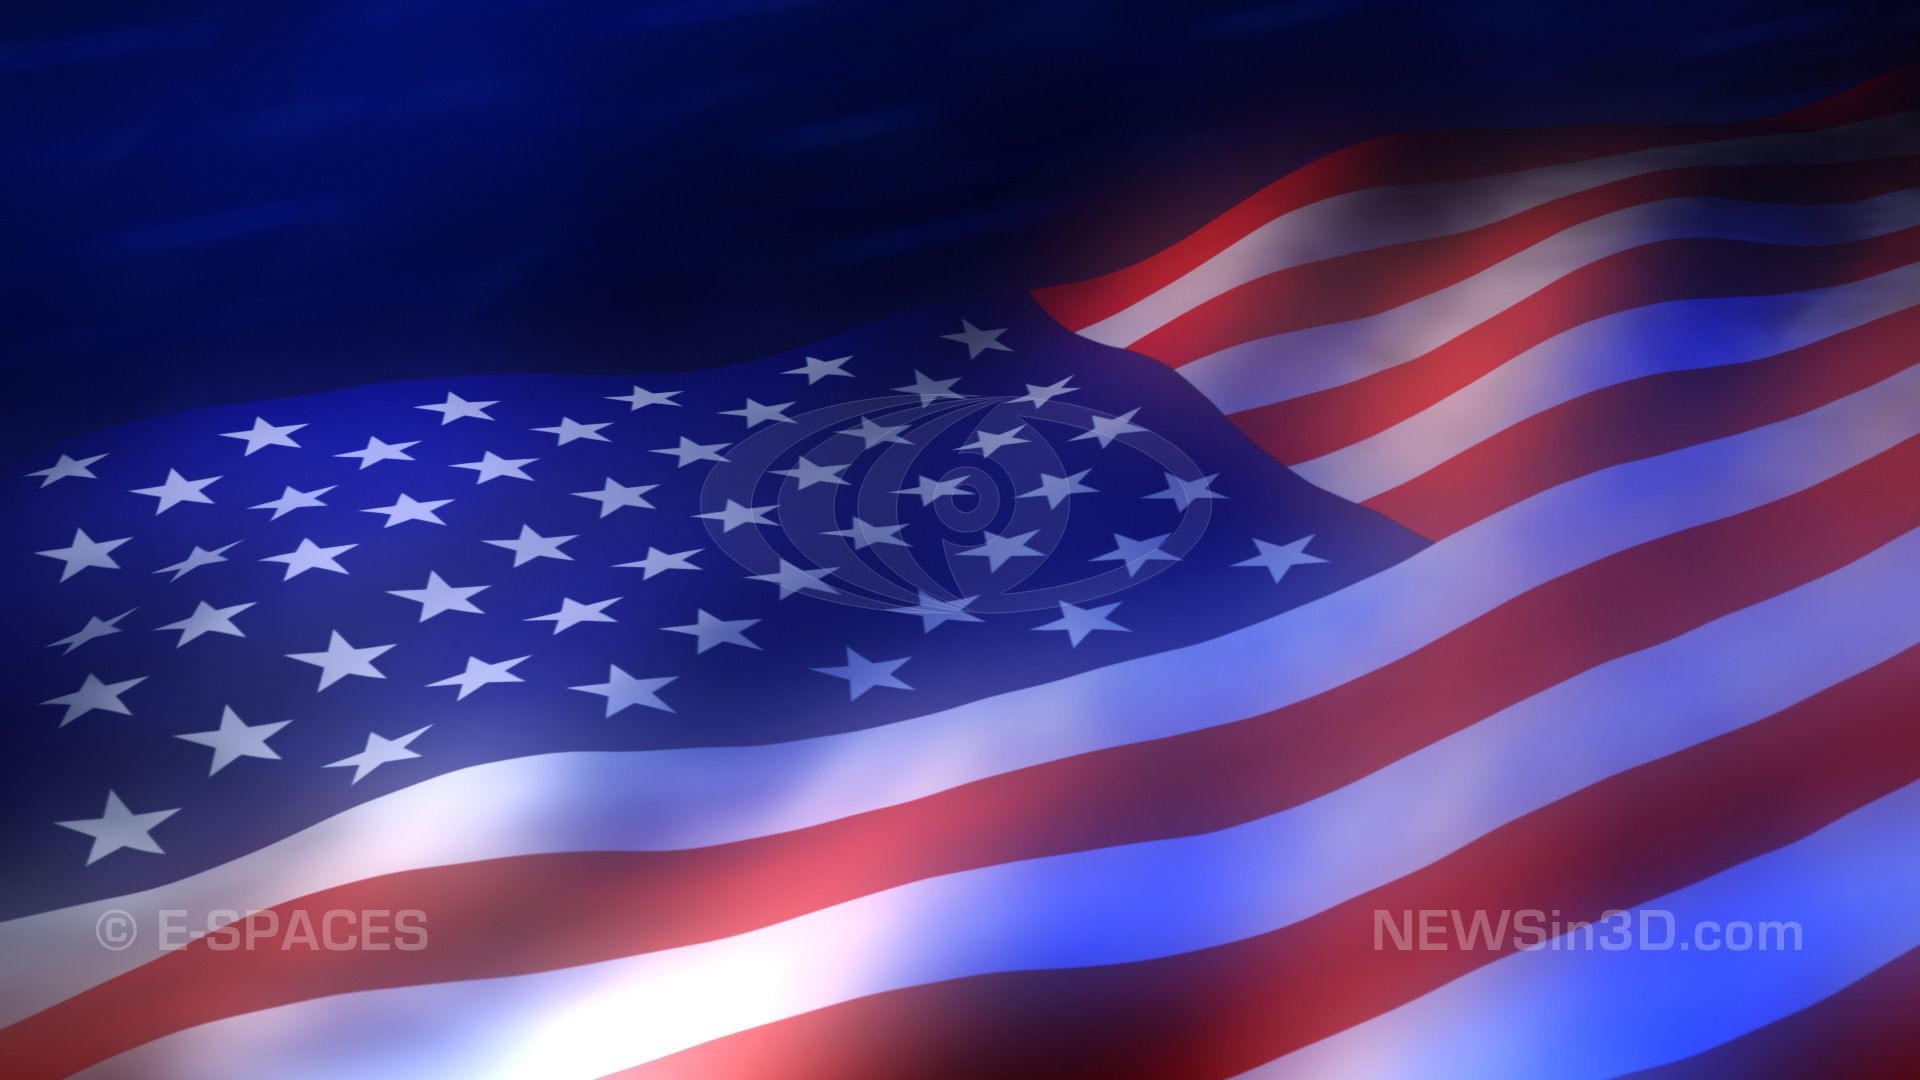 1920x1080 Free 3D Animated Wallpaper | 21 3d Animation Wallpaper 3d-animation-background-1  – Free Wallpaper ... Polygonal American Flag ...